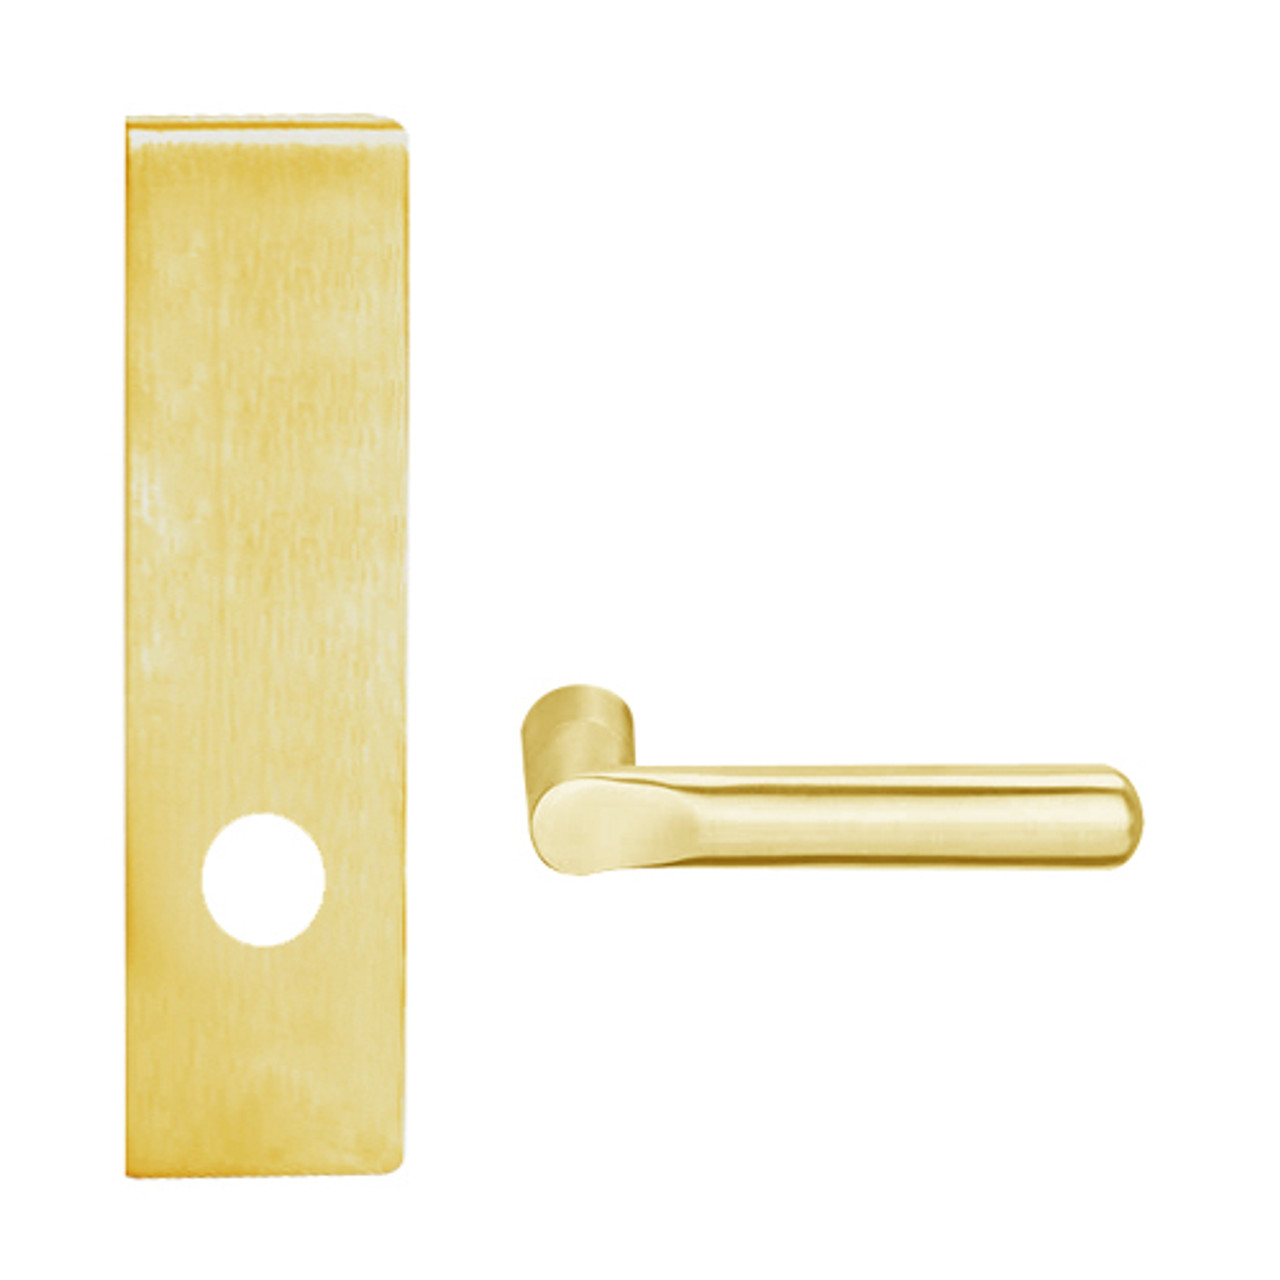 L9010-18N-626 Schlage L Series Passage Latch Commercial Mortise Lock with 18 Cast Lever Design in Satin Chrome